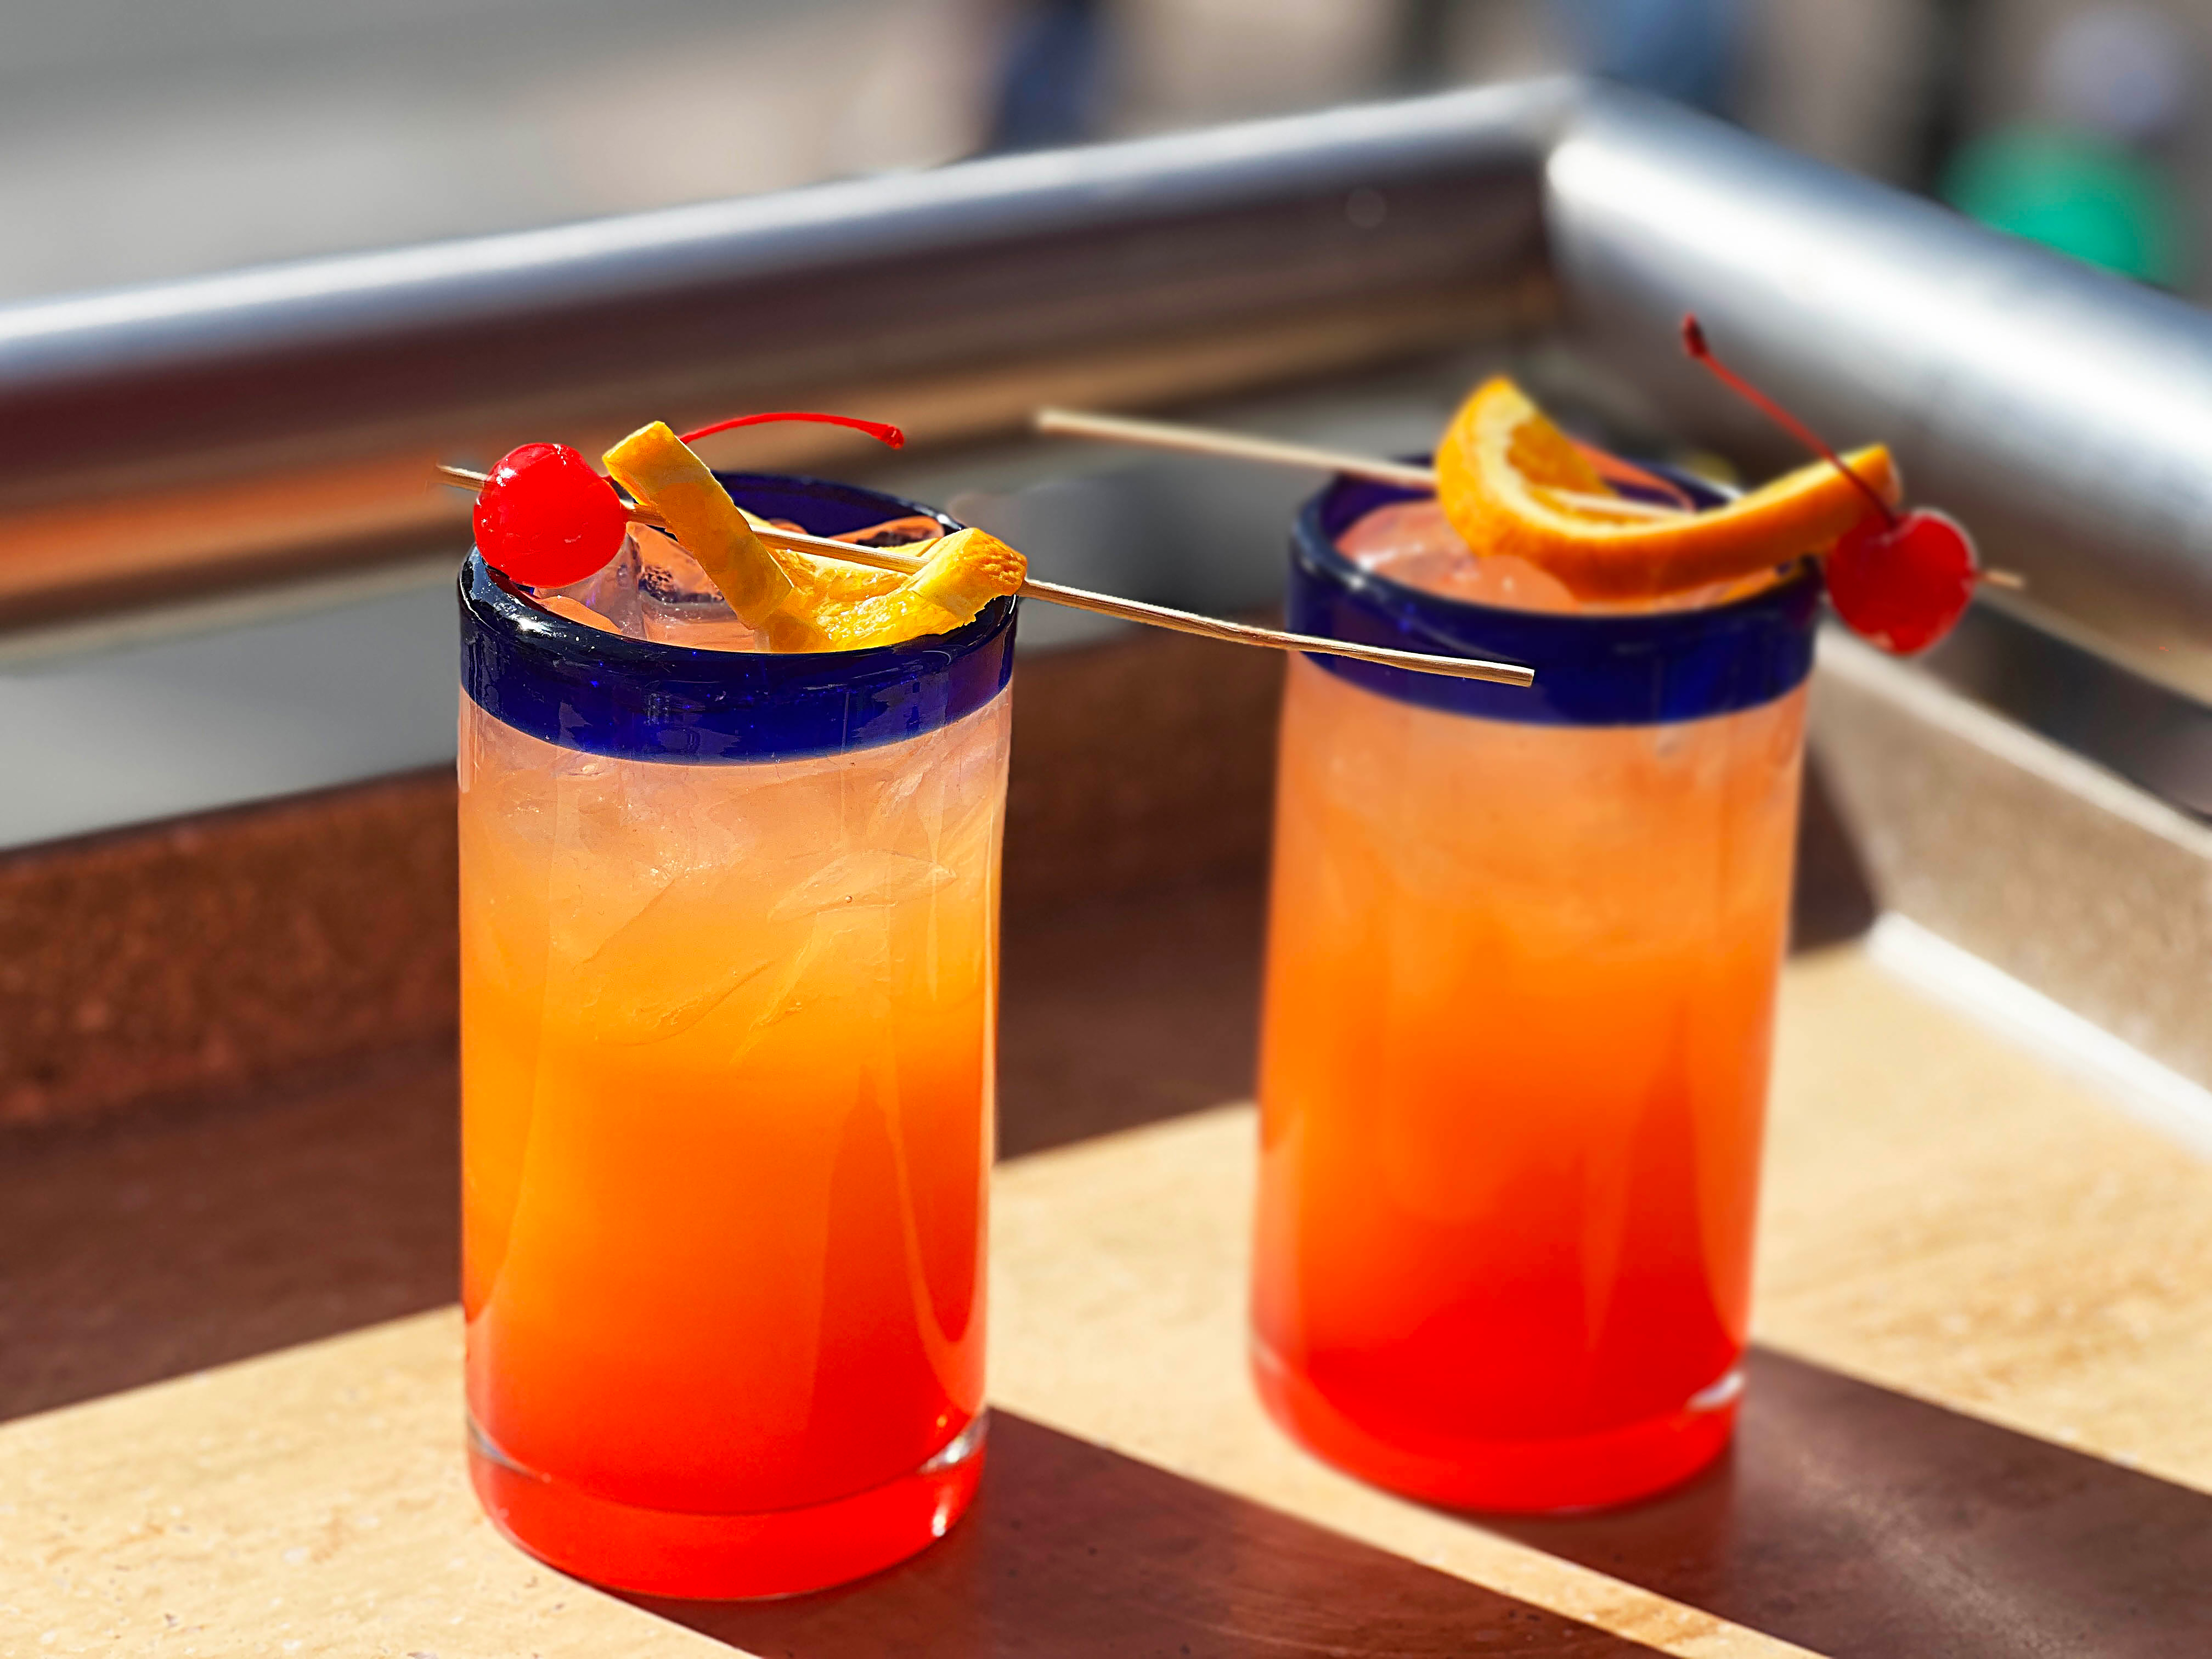 Exclusive Cocktails to Take the Spotlight at Cabo Wabo Beach Club and Cabo Wabo Cantina as Sammy Hagar’s Star Shines Bright at Hollywood Walk of Fame Ceremony